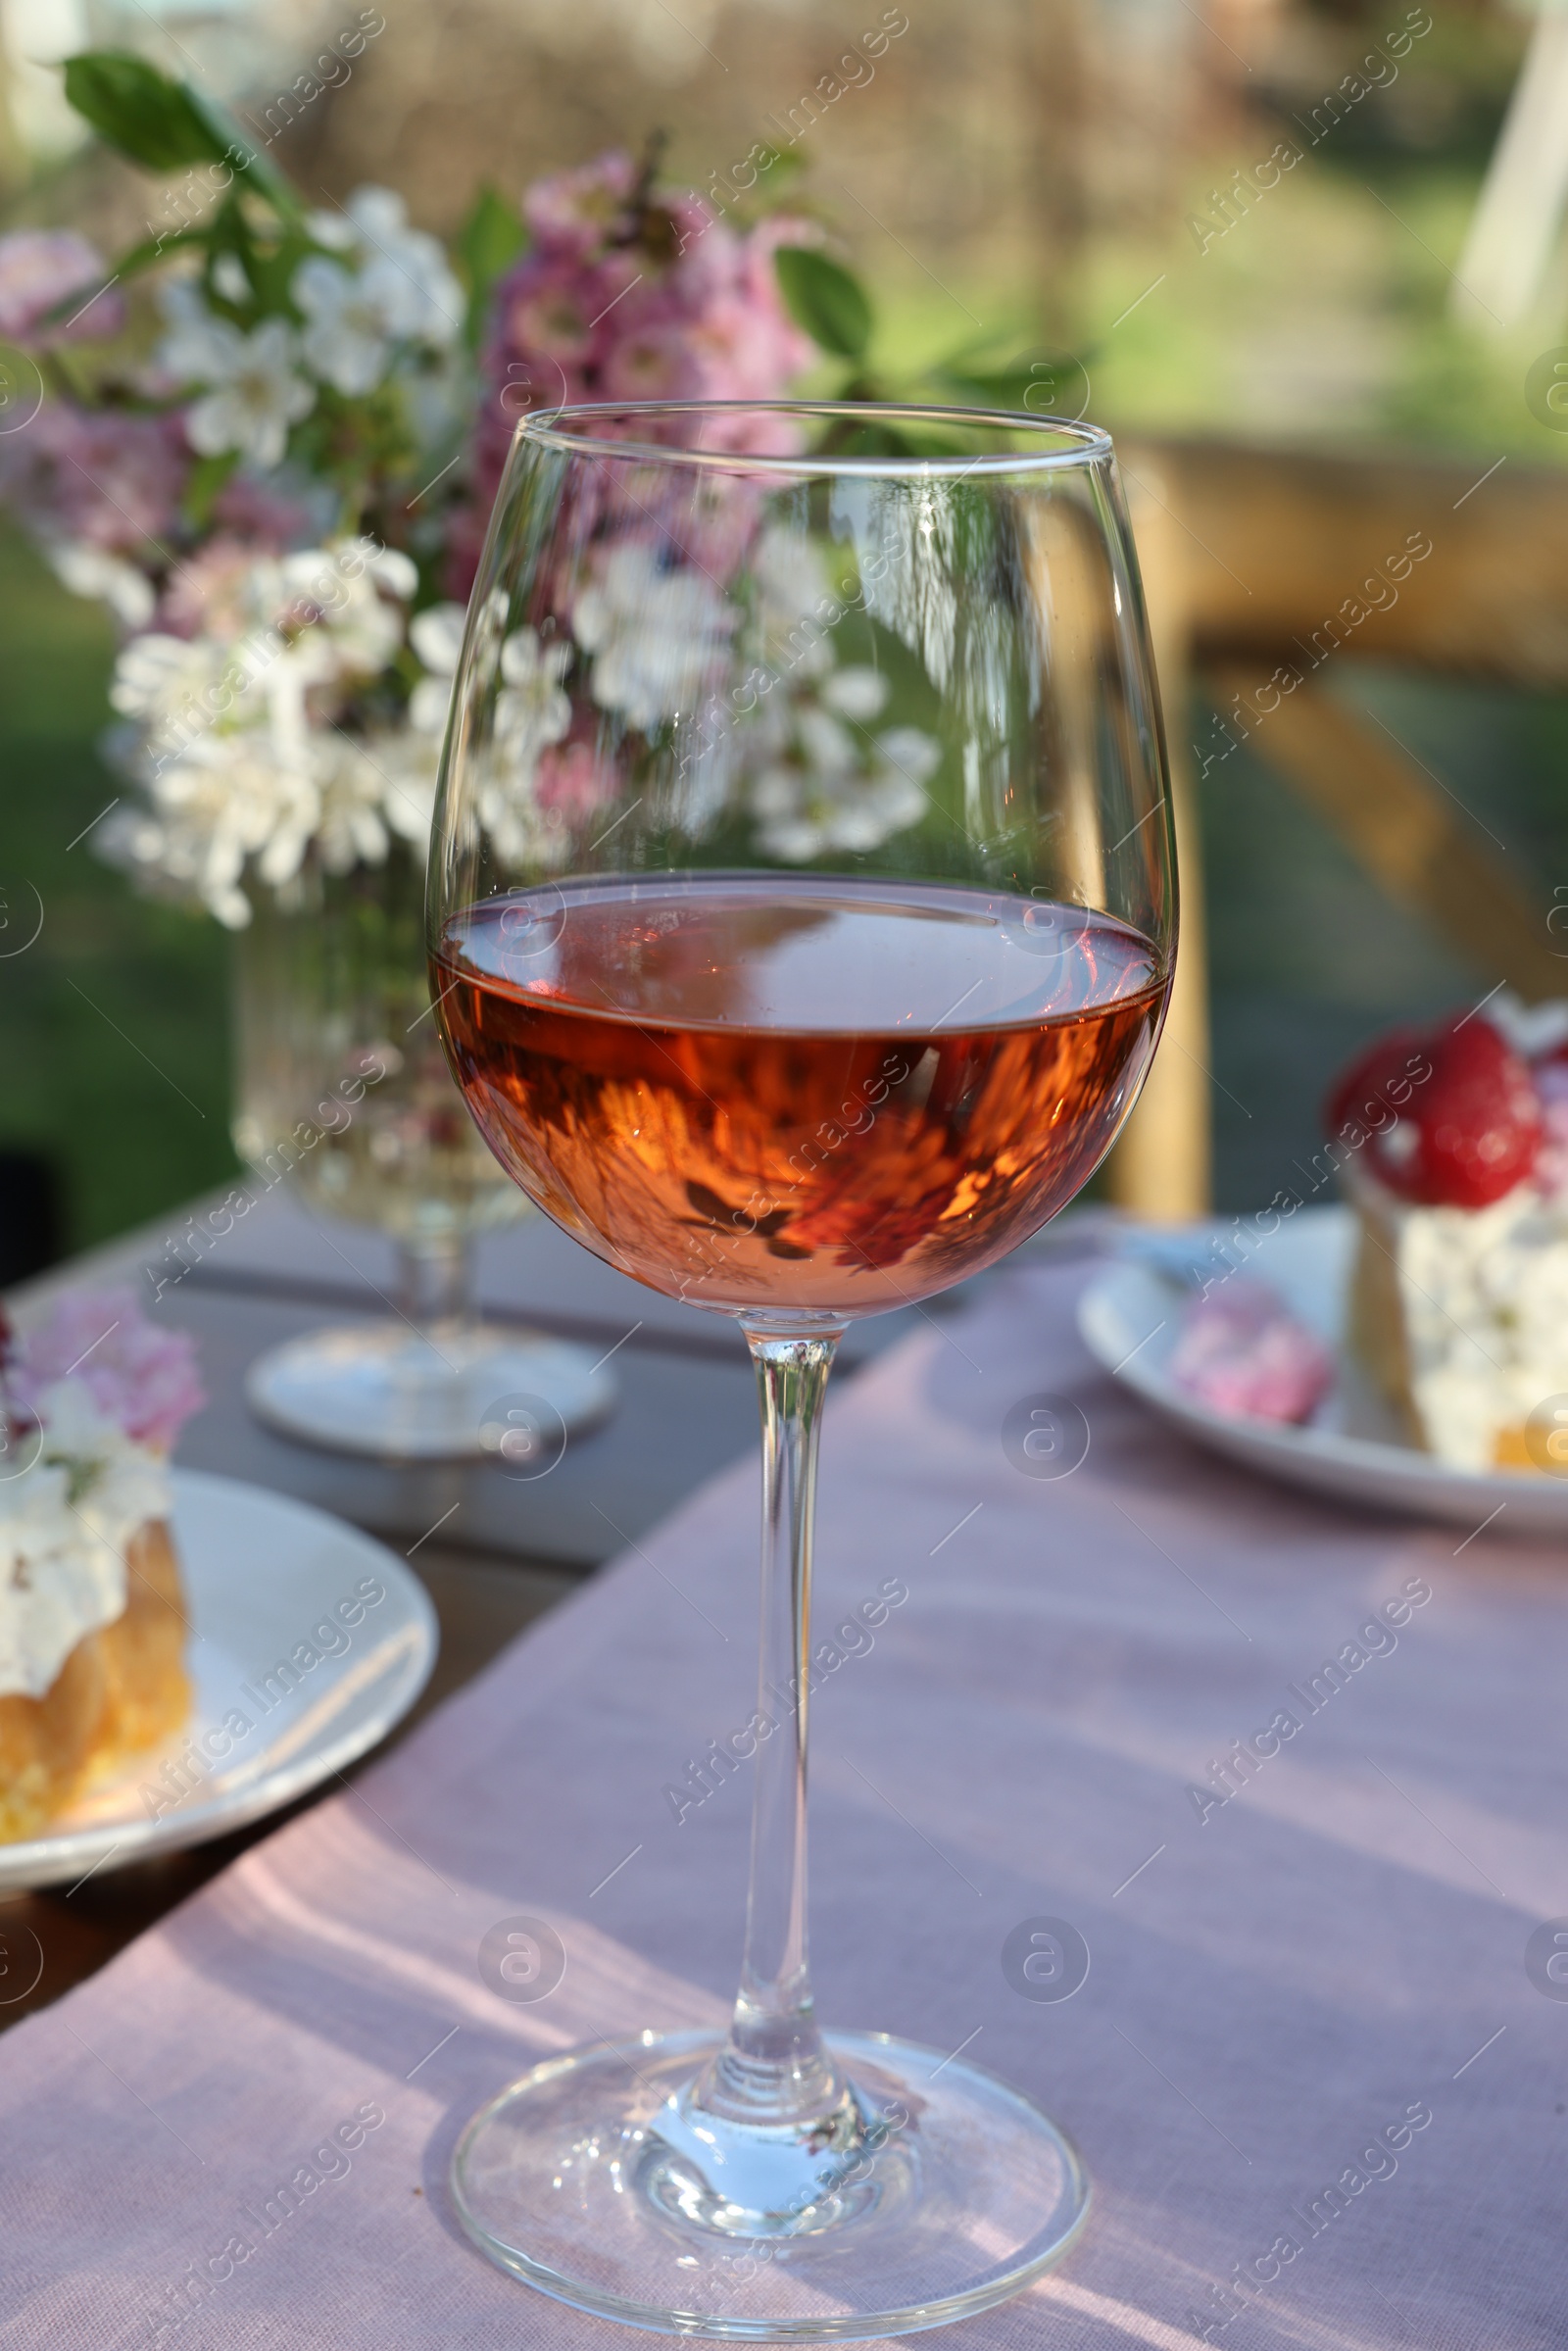 Photo of Glass of wine on table served for romantic date in garden